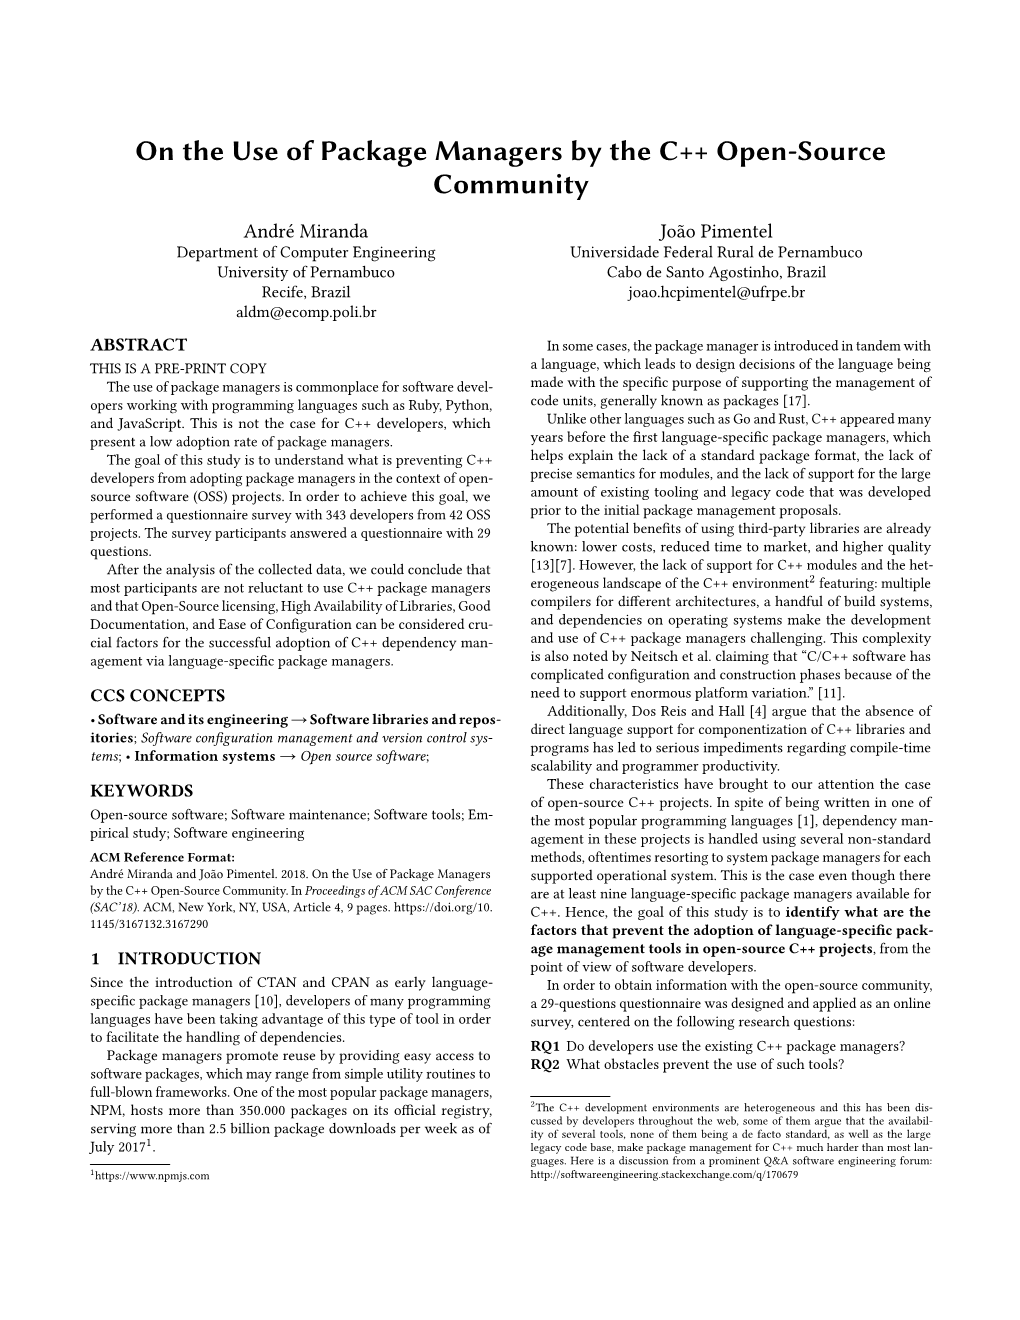 On the Use of Package Managers by the C++ Open-Source Community